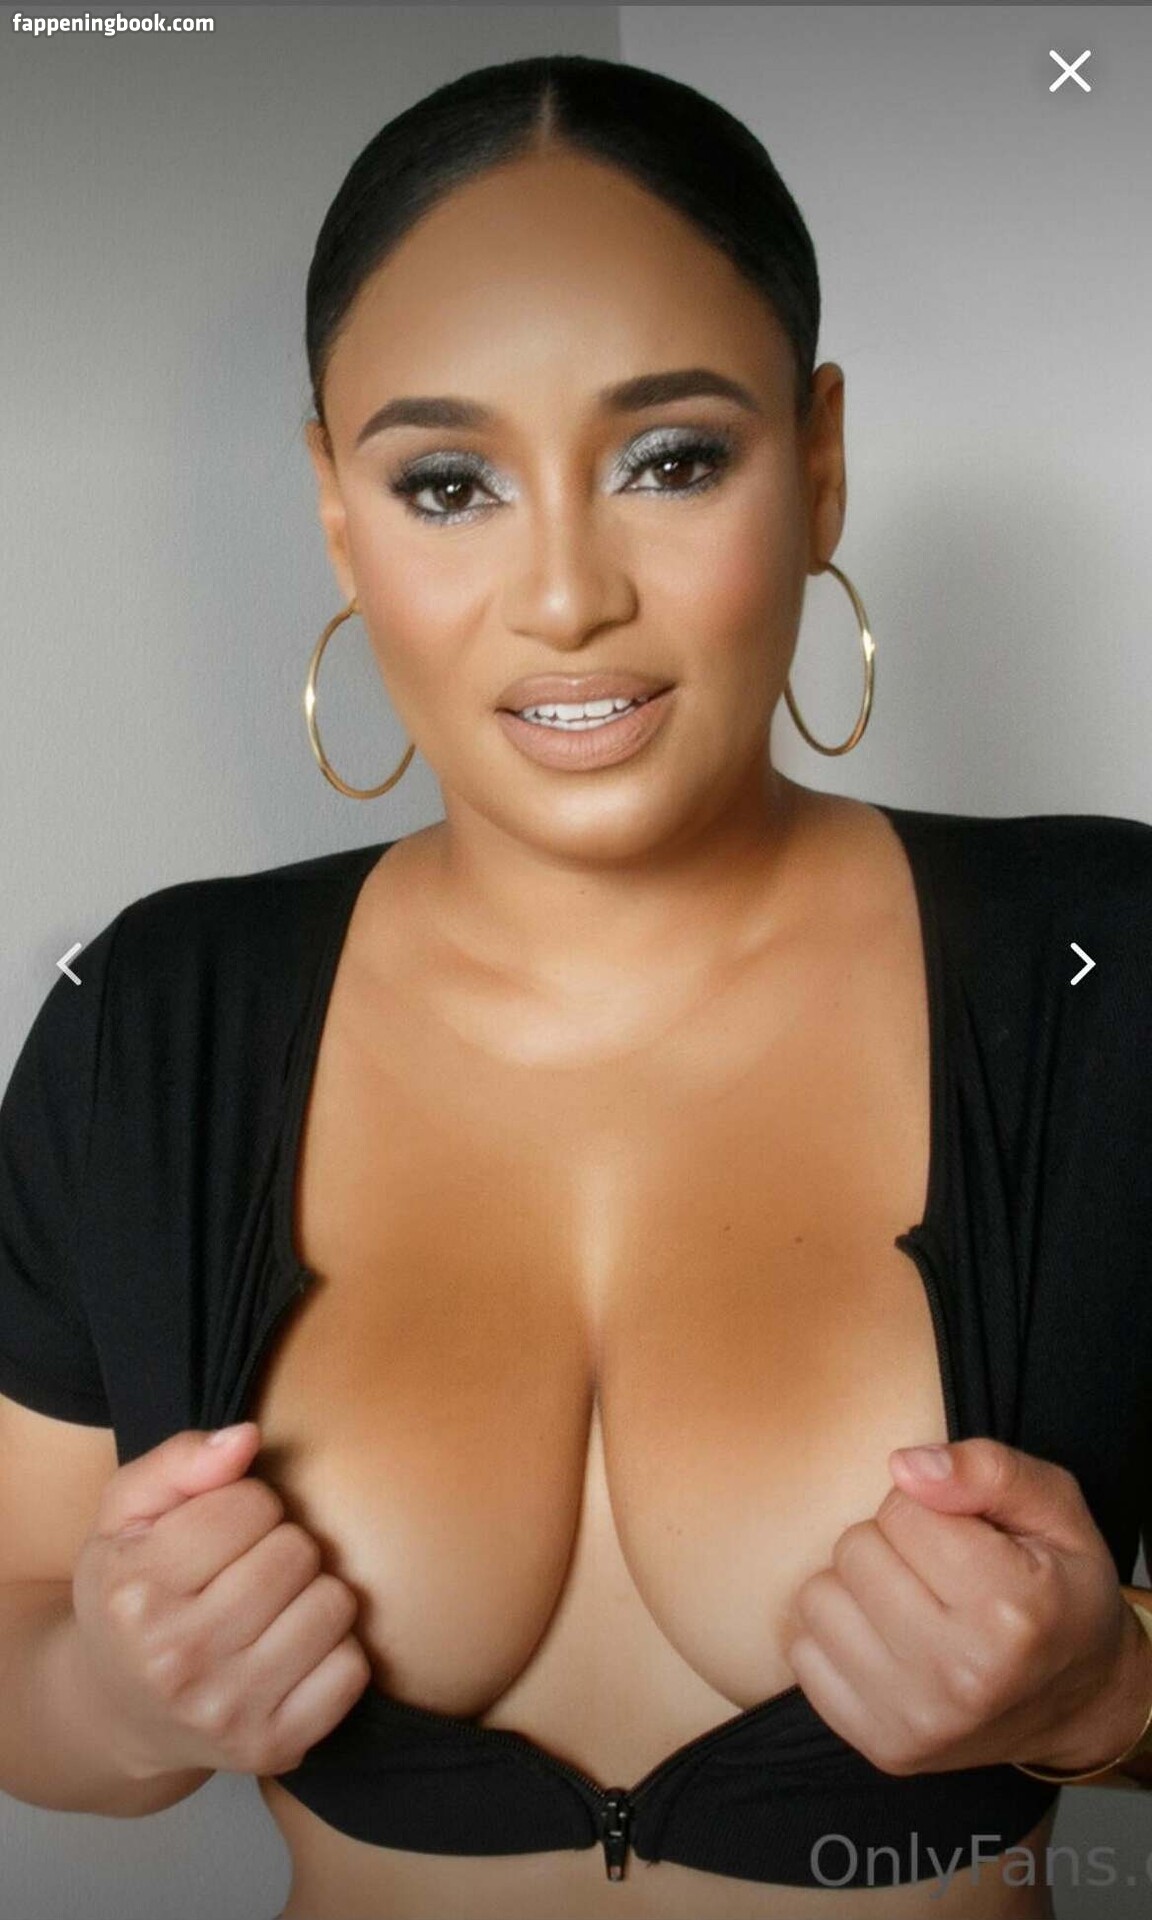 Tahiry onlyfans pictures